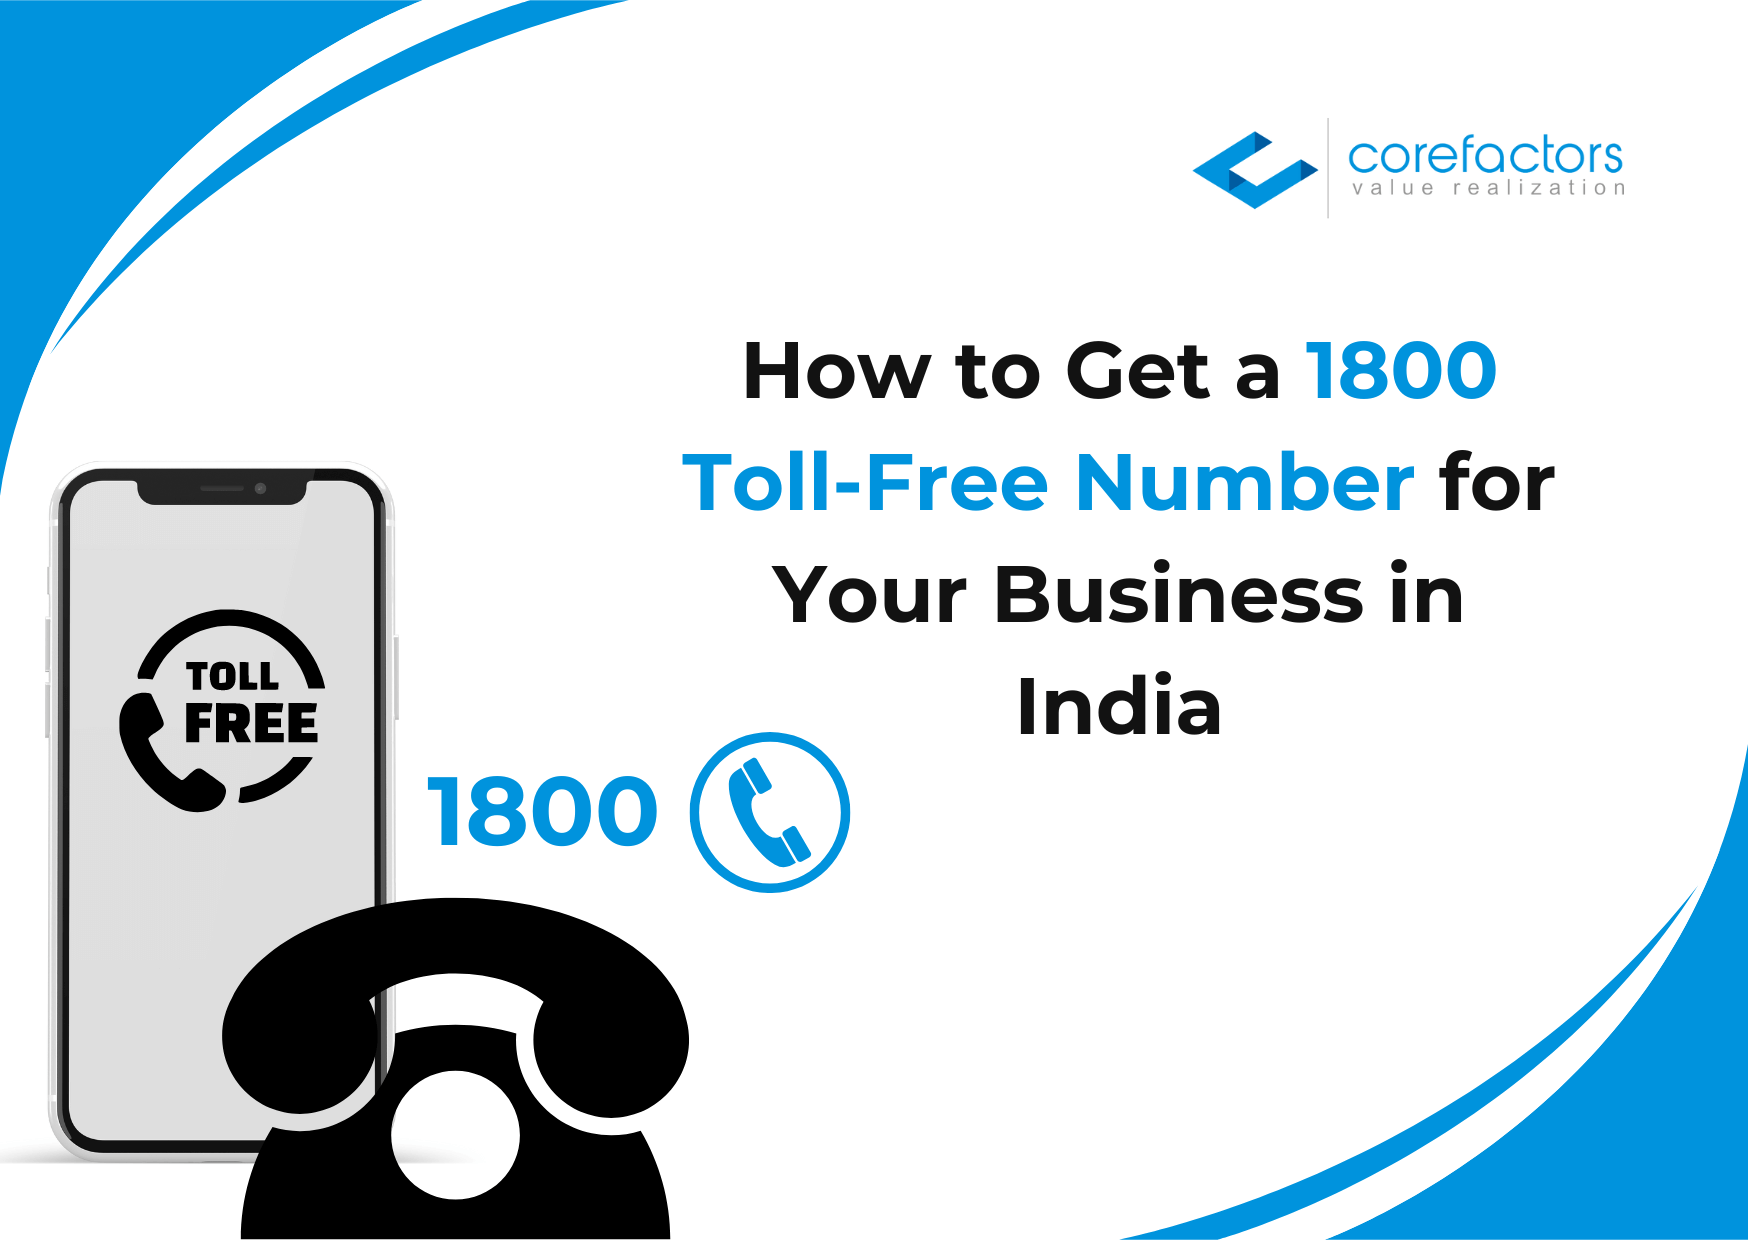 How to Get an 1800 Toll-free Number for Your Business in India